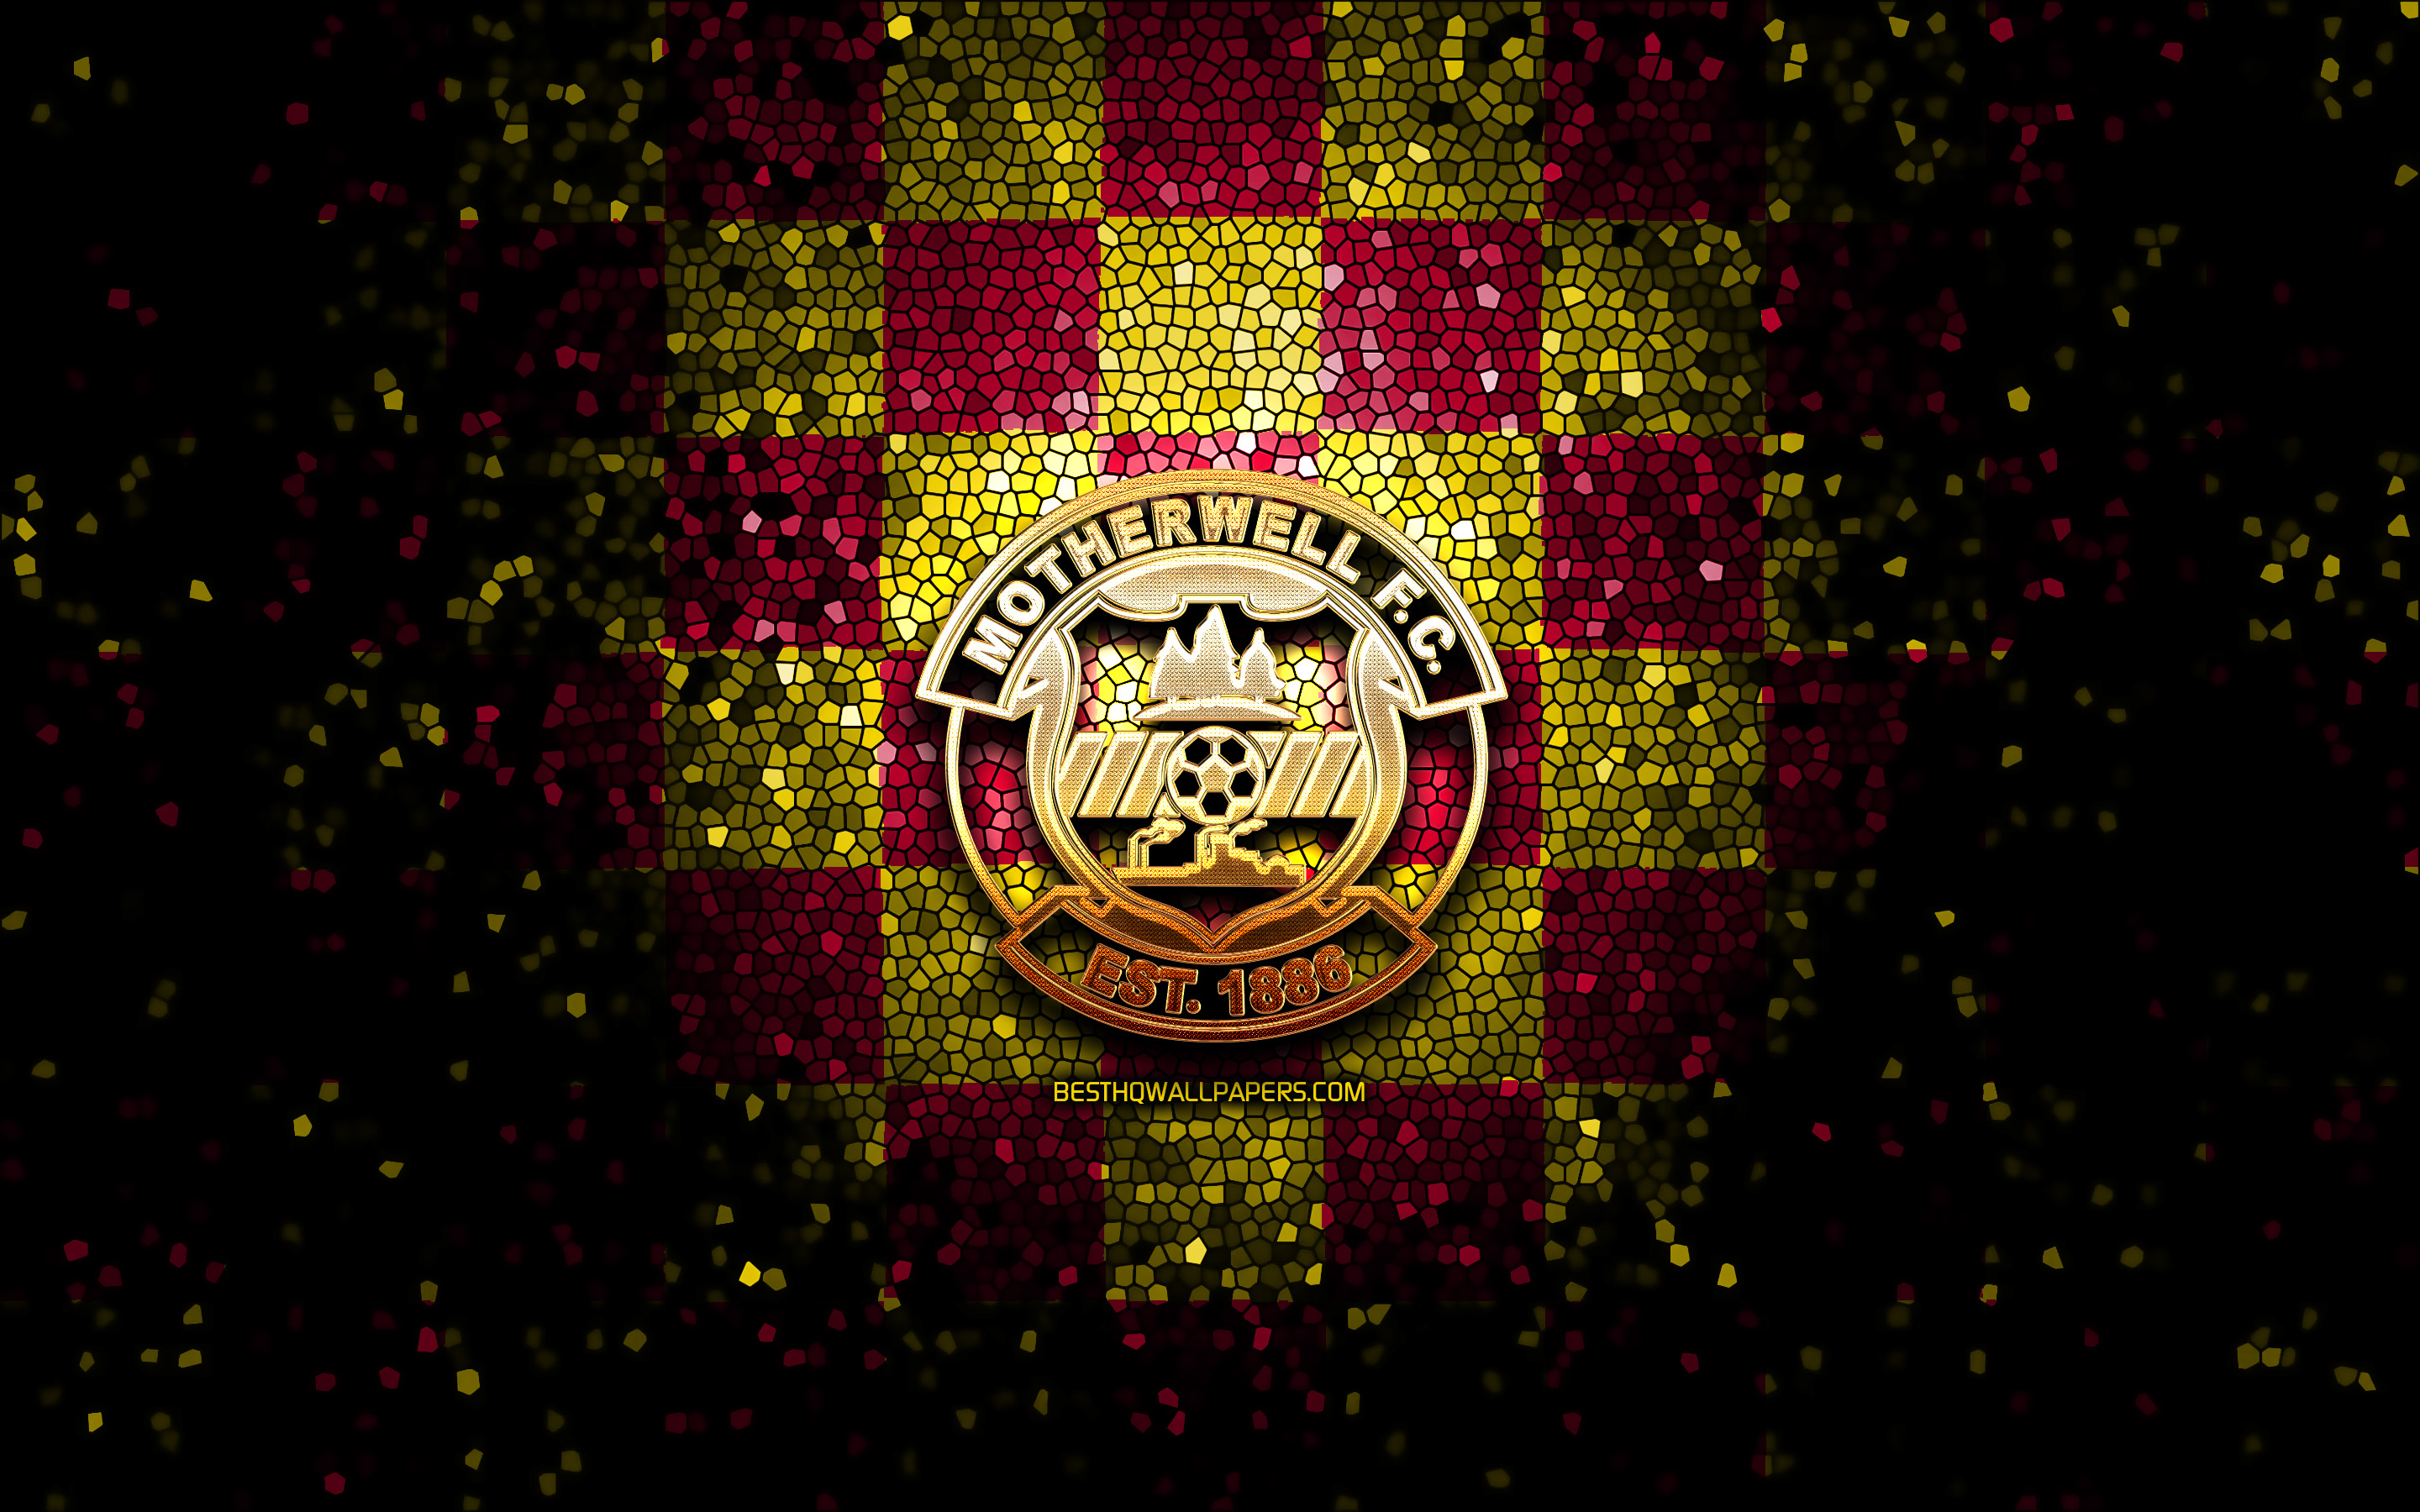 Download wallpaper Motherwell FC, glitter logo, Scottish Premiership, red yellow checkered background, soccer, scottish football club, Motherwell logo, mosaic art, football, FC Motherwell for desktop with resolution 2880x1800. High Quality HD picture